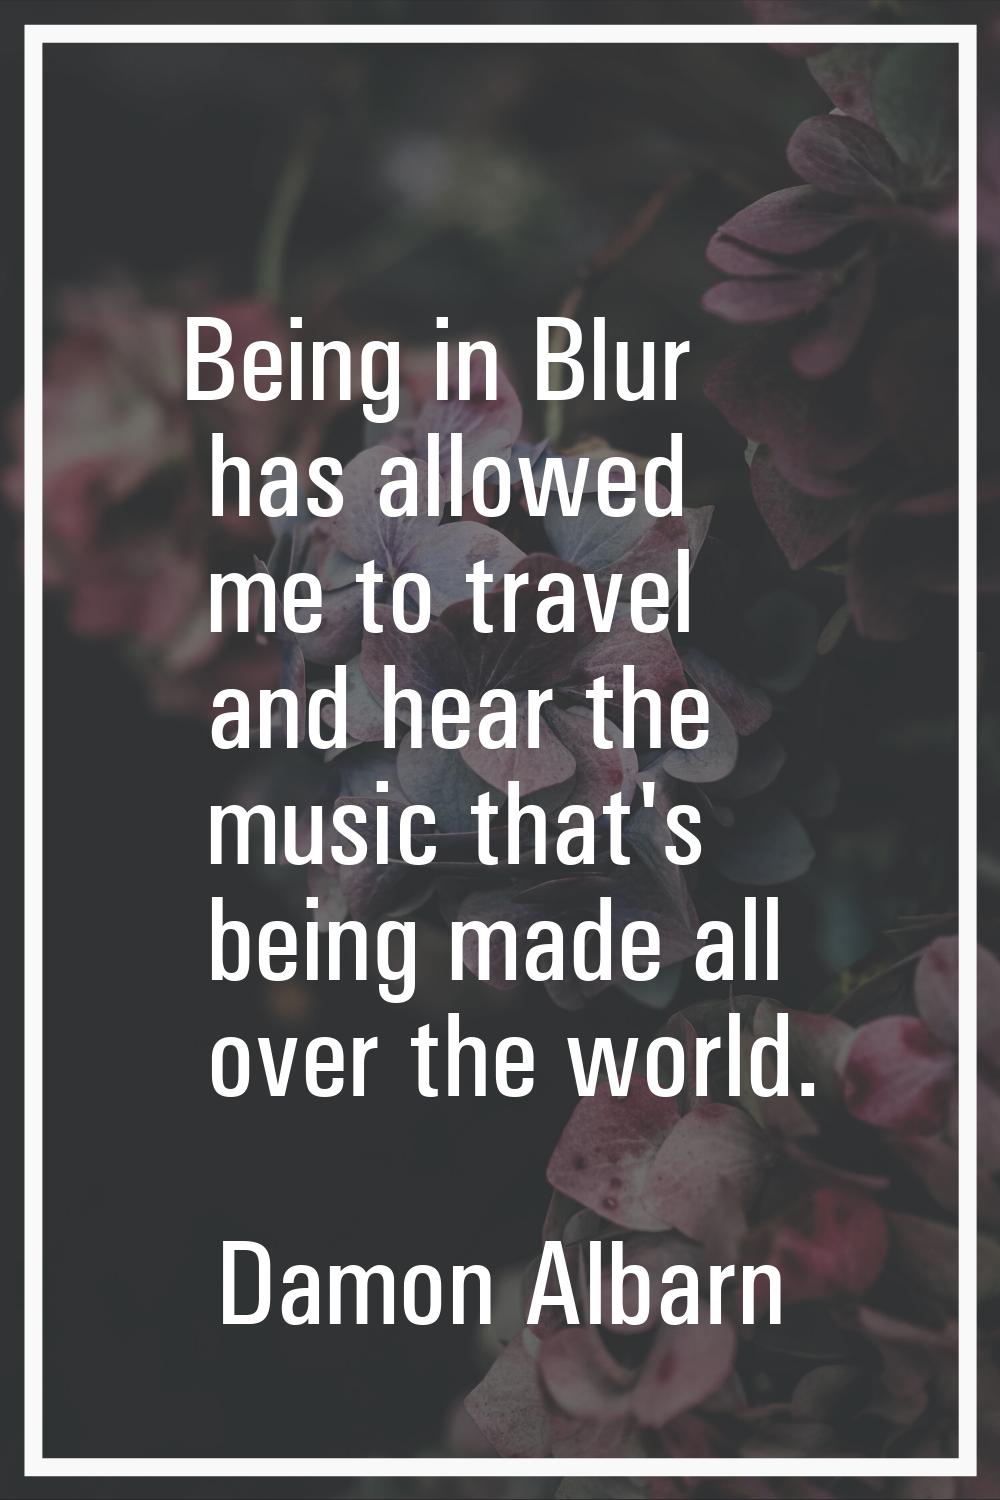 Being in Blur has allowed me to travel and hear the music that's being made all over the world.